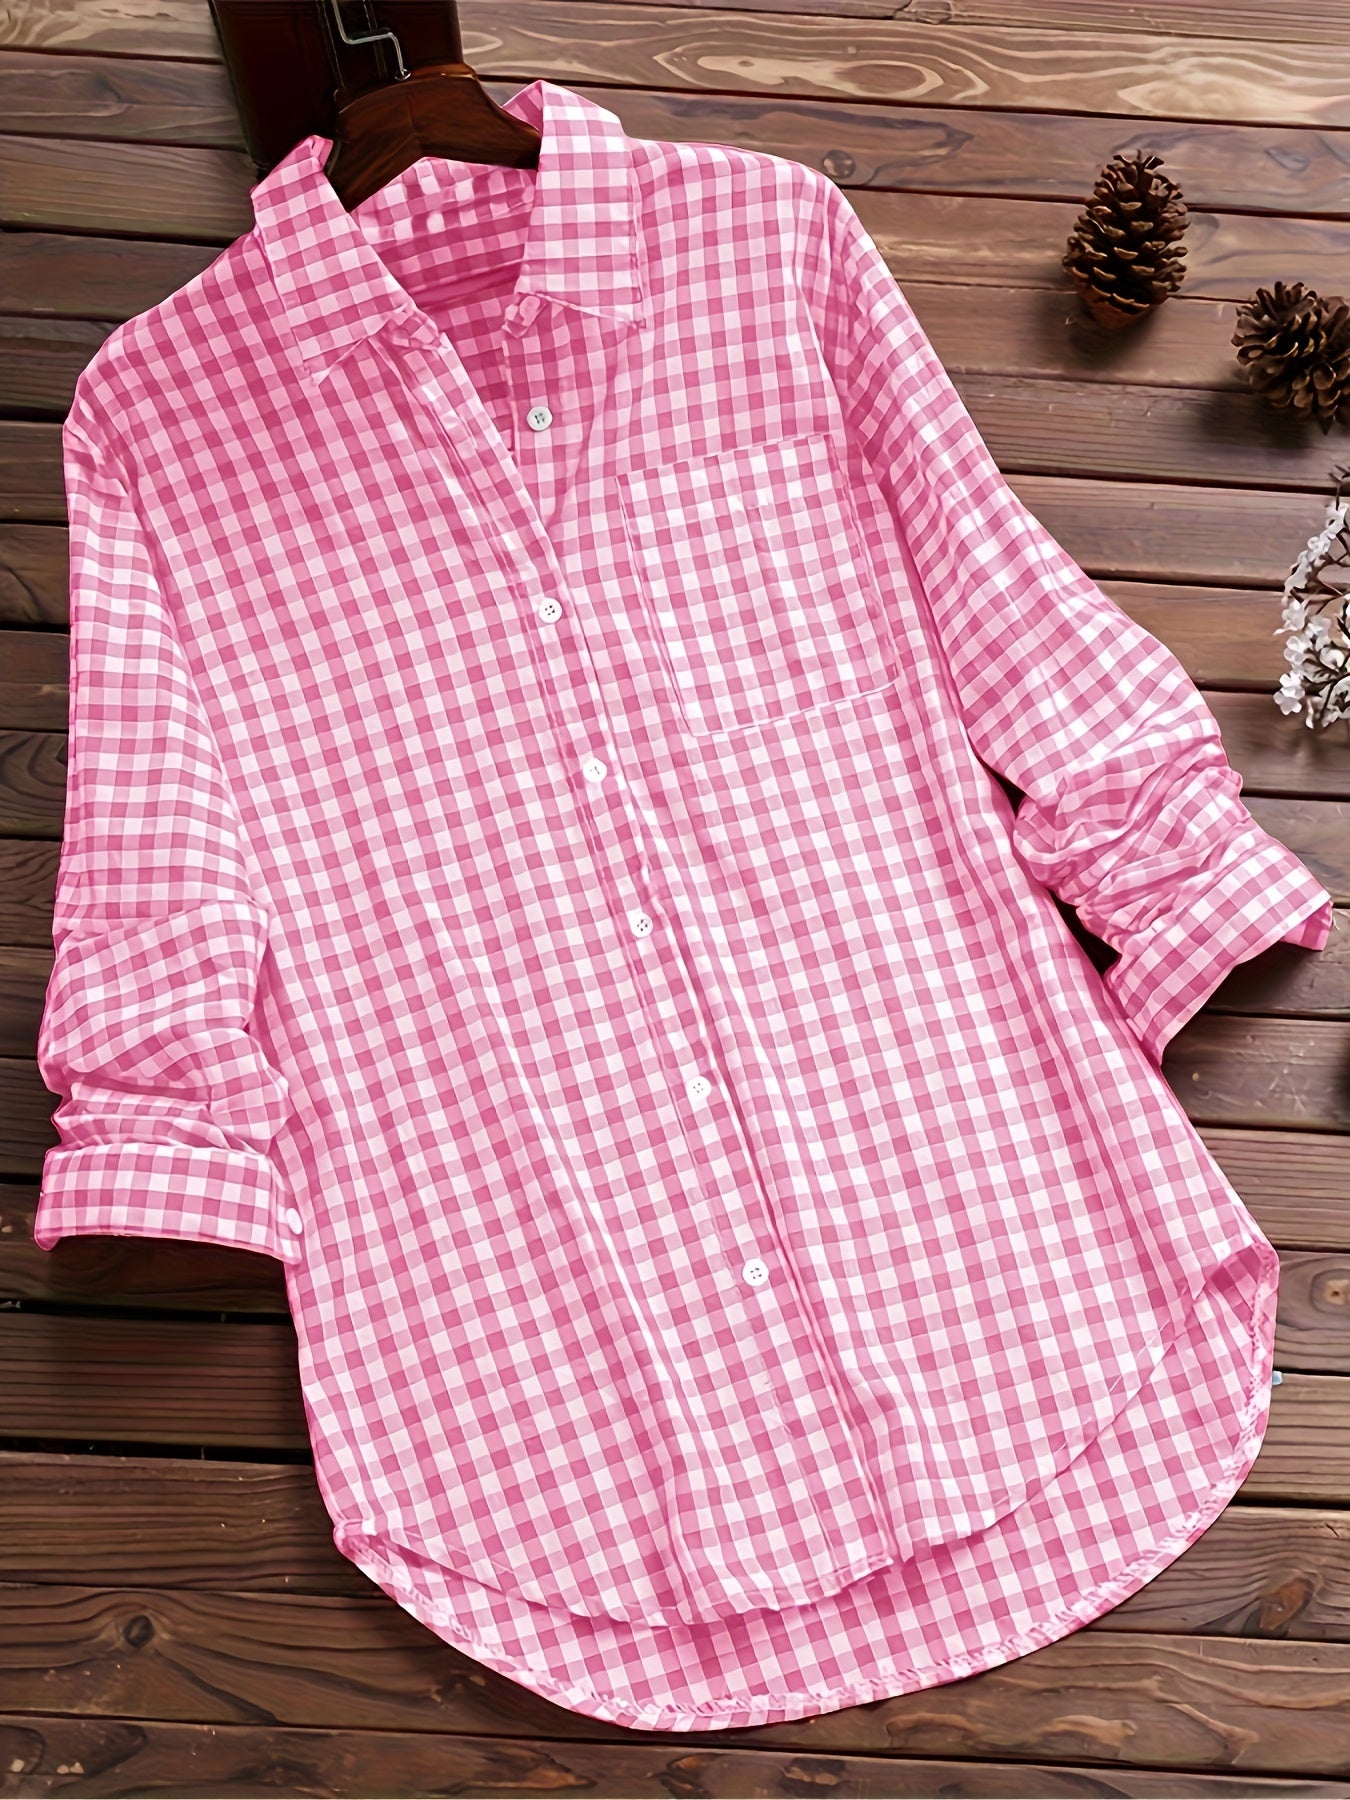 Gingham Print Classic Shirt, Vintage Button Front Long Sleeve Shirt With A Collar, Women's Clothing